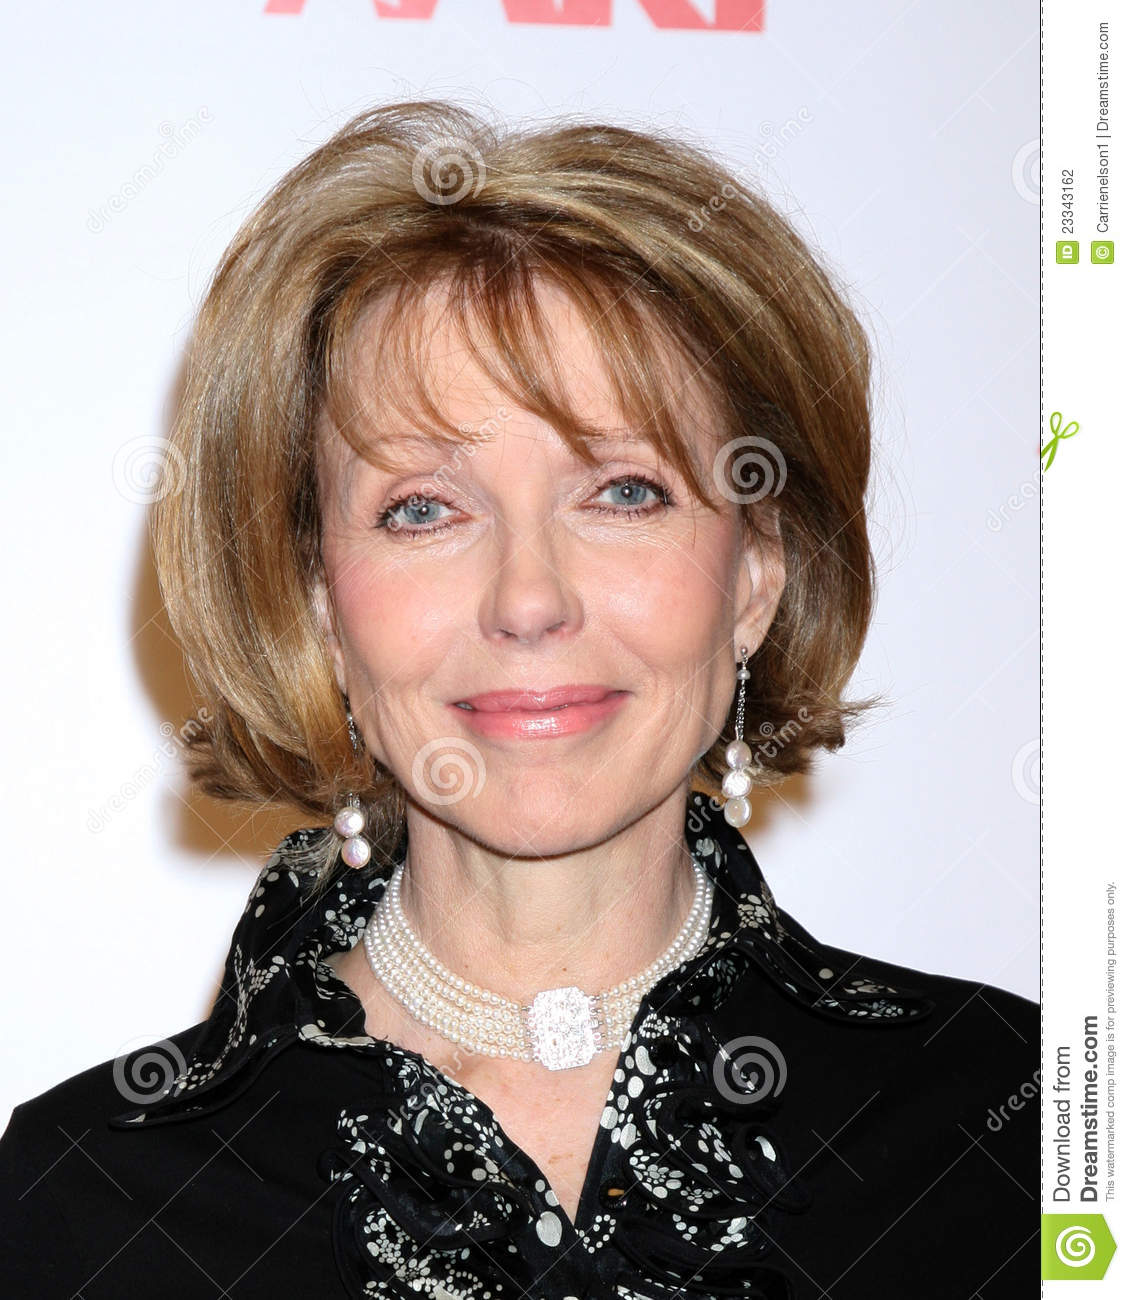 susan-blakely-pictures